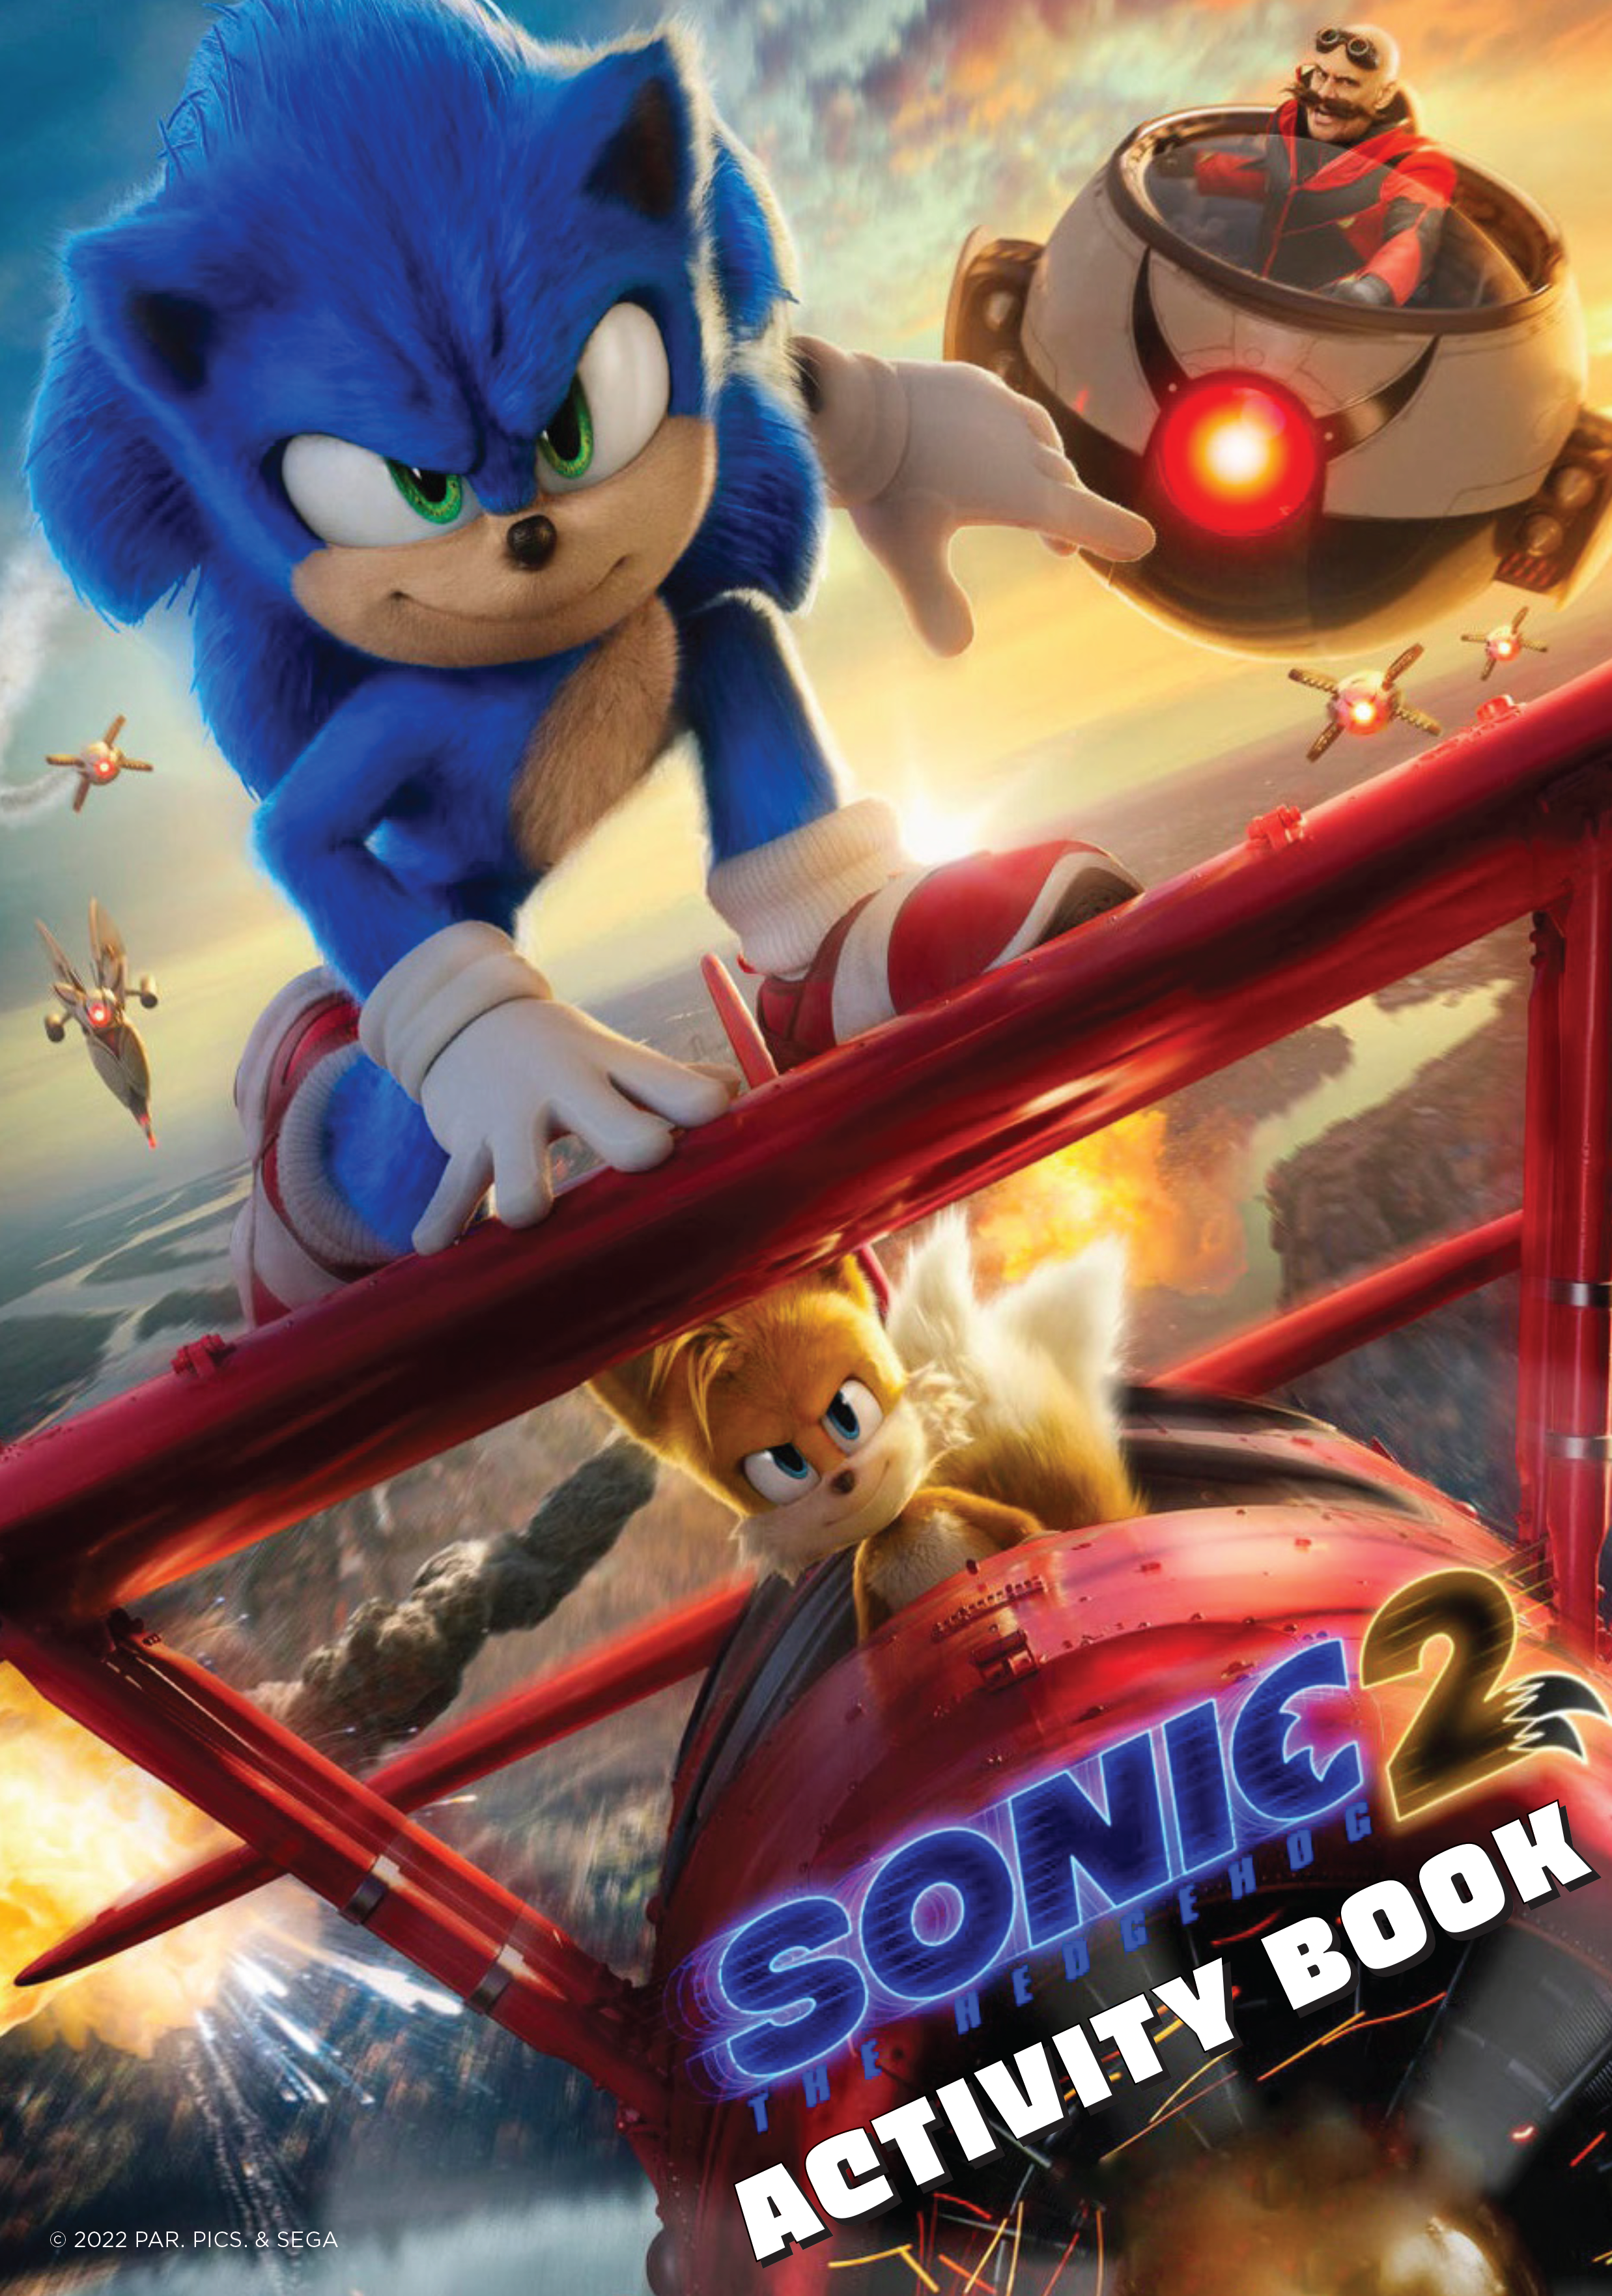 Sonic the Hedgehog 2 [2022] [PG] - 1.3.3, Parents' Guide & Review